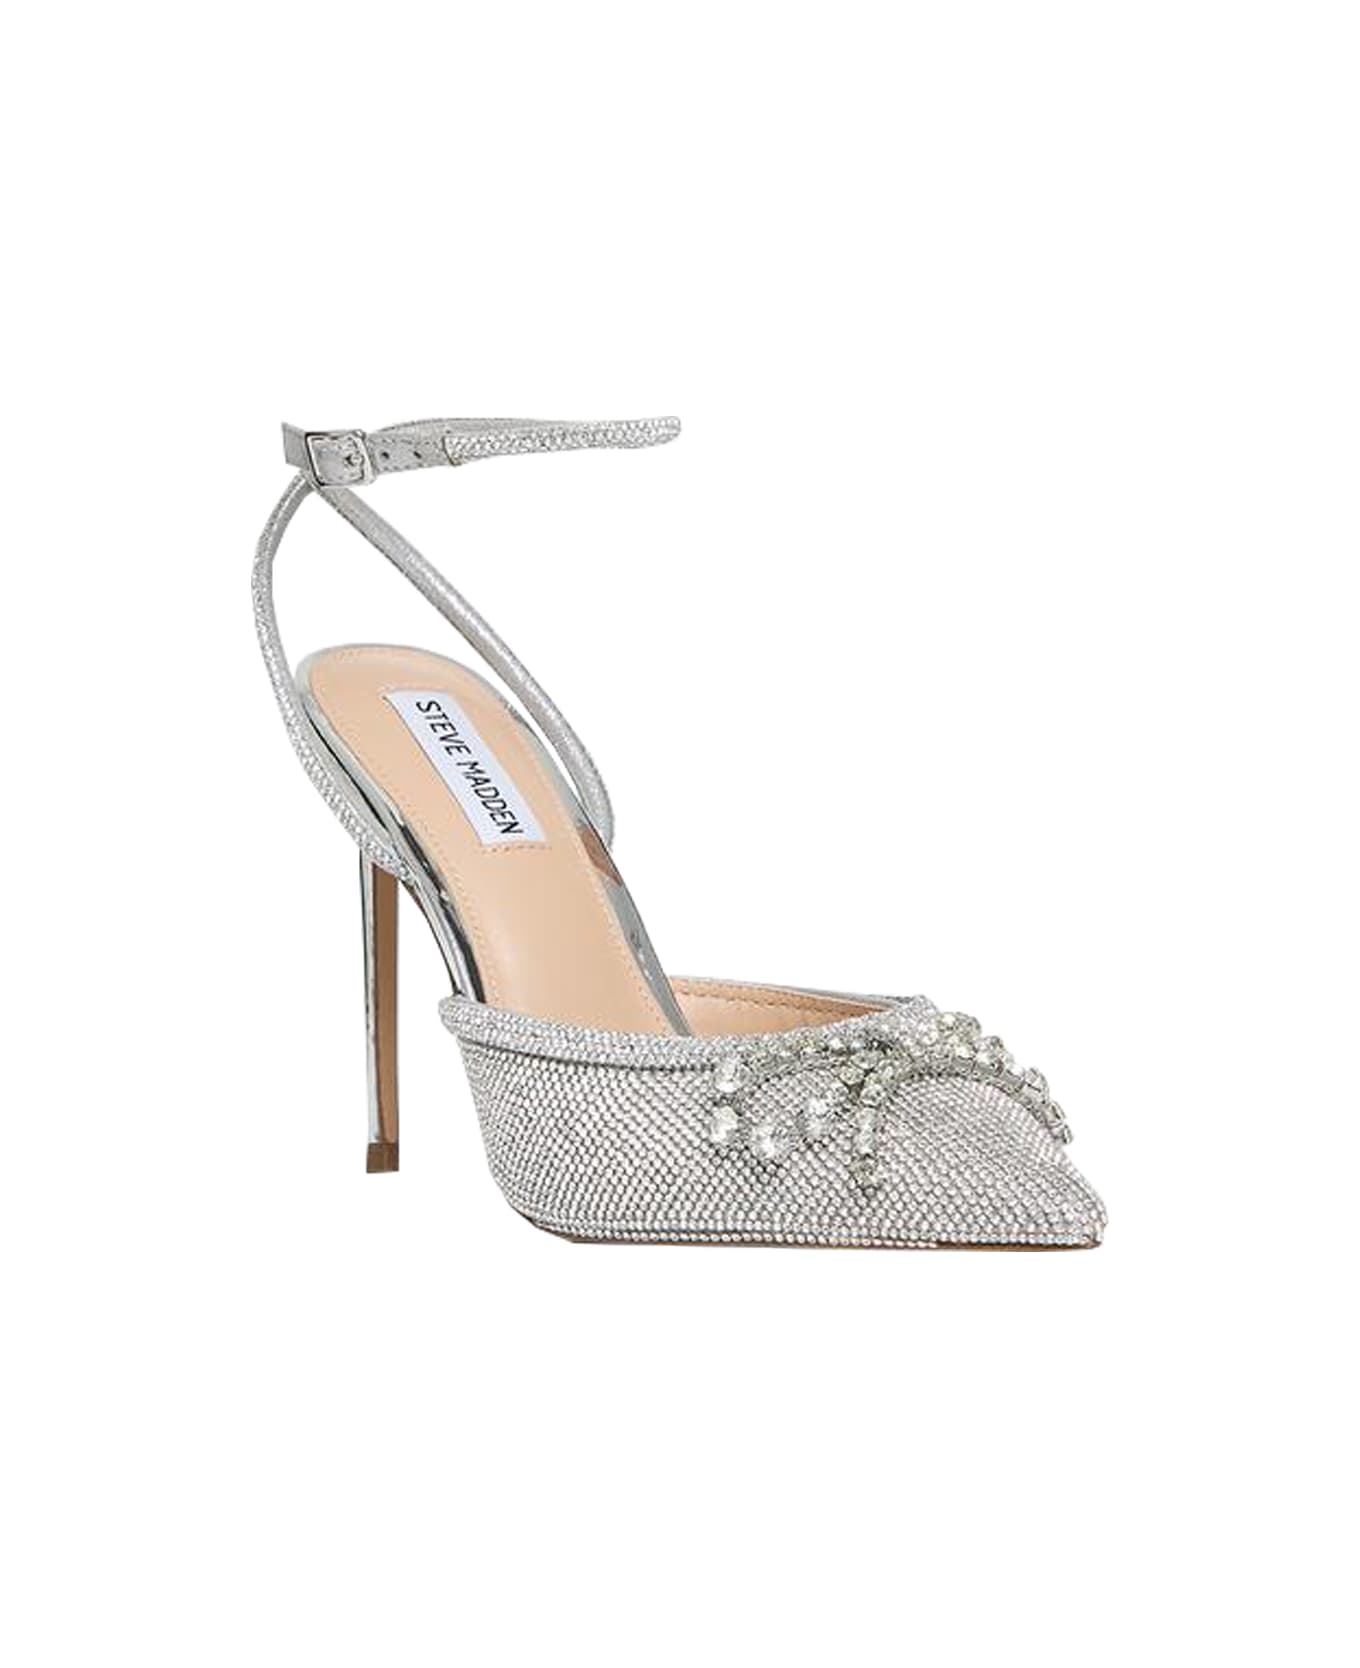 Steve Madden Shoes With Heel - Silver